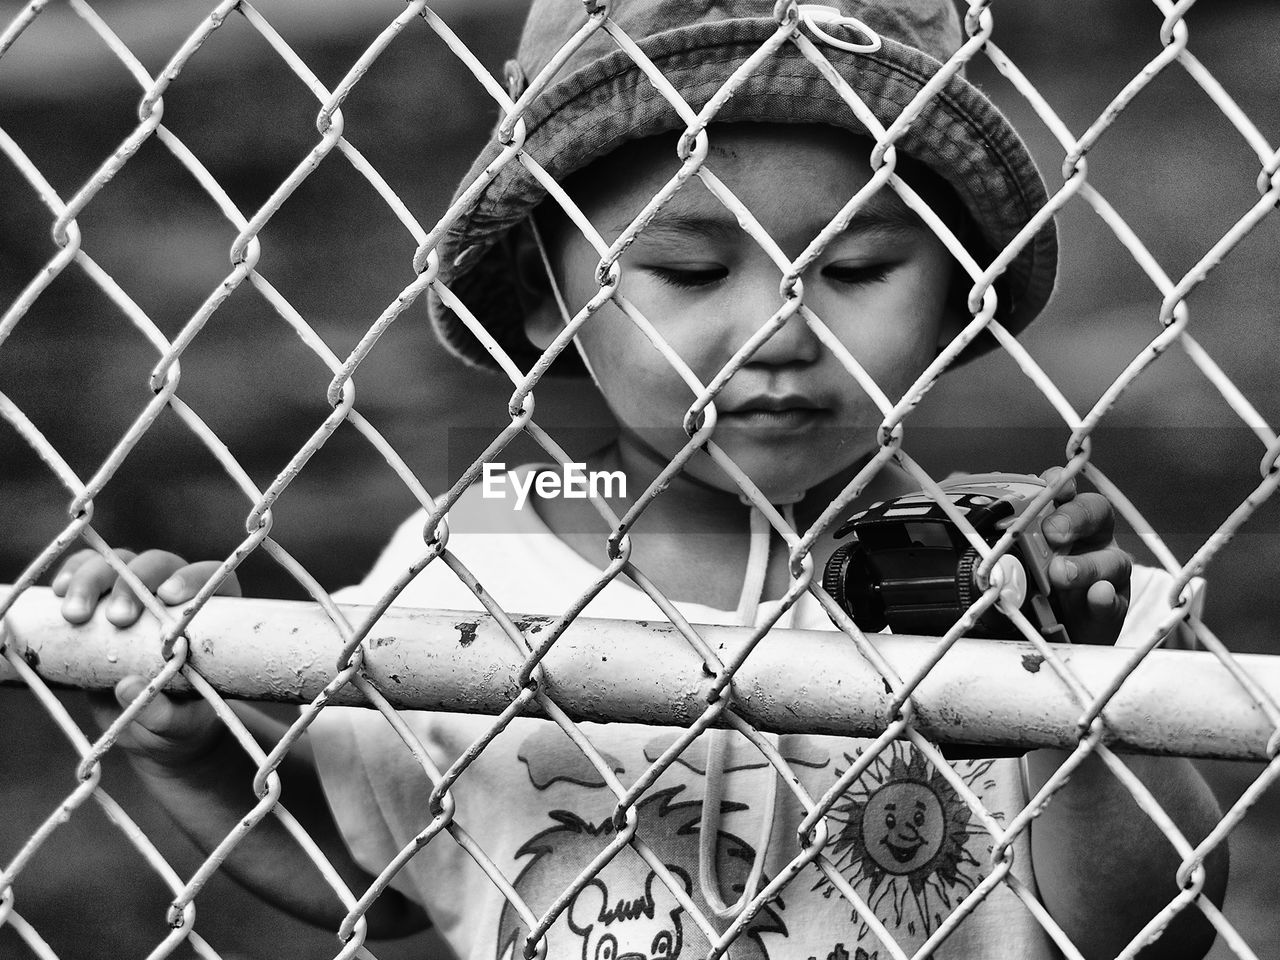 PORTRAIT OF A YOUNG MAN SEEN THROUGH CHAINLINK FENCE